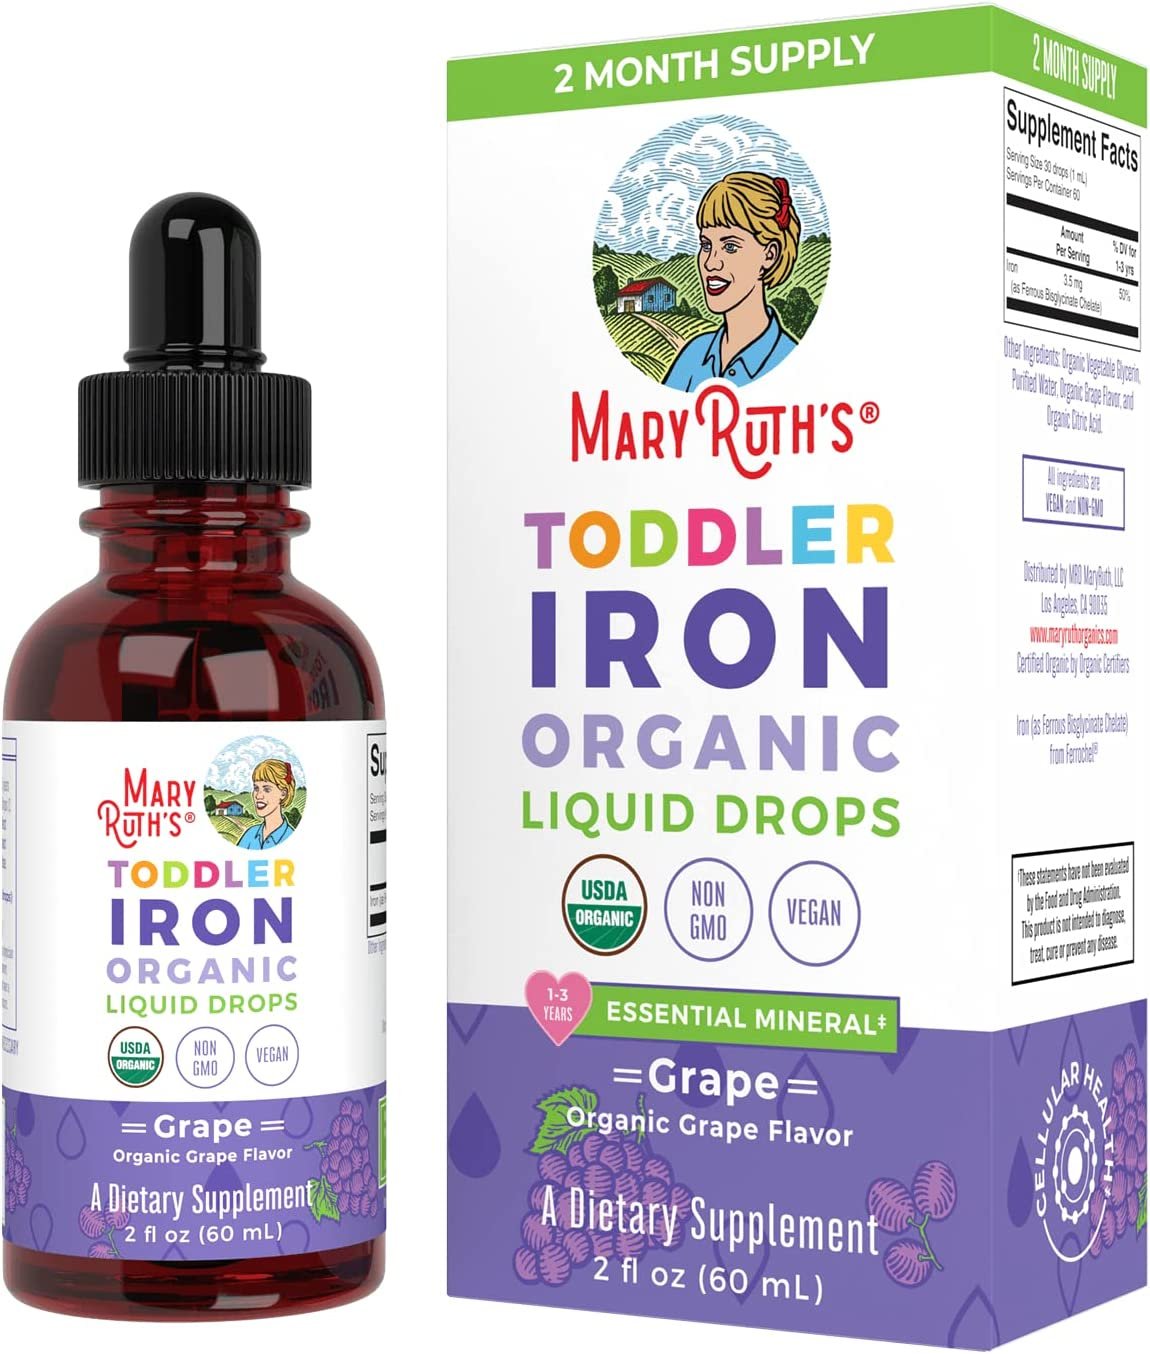 Iron Supplement for Toddlers*